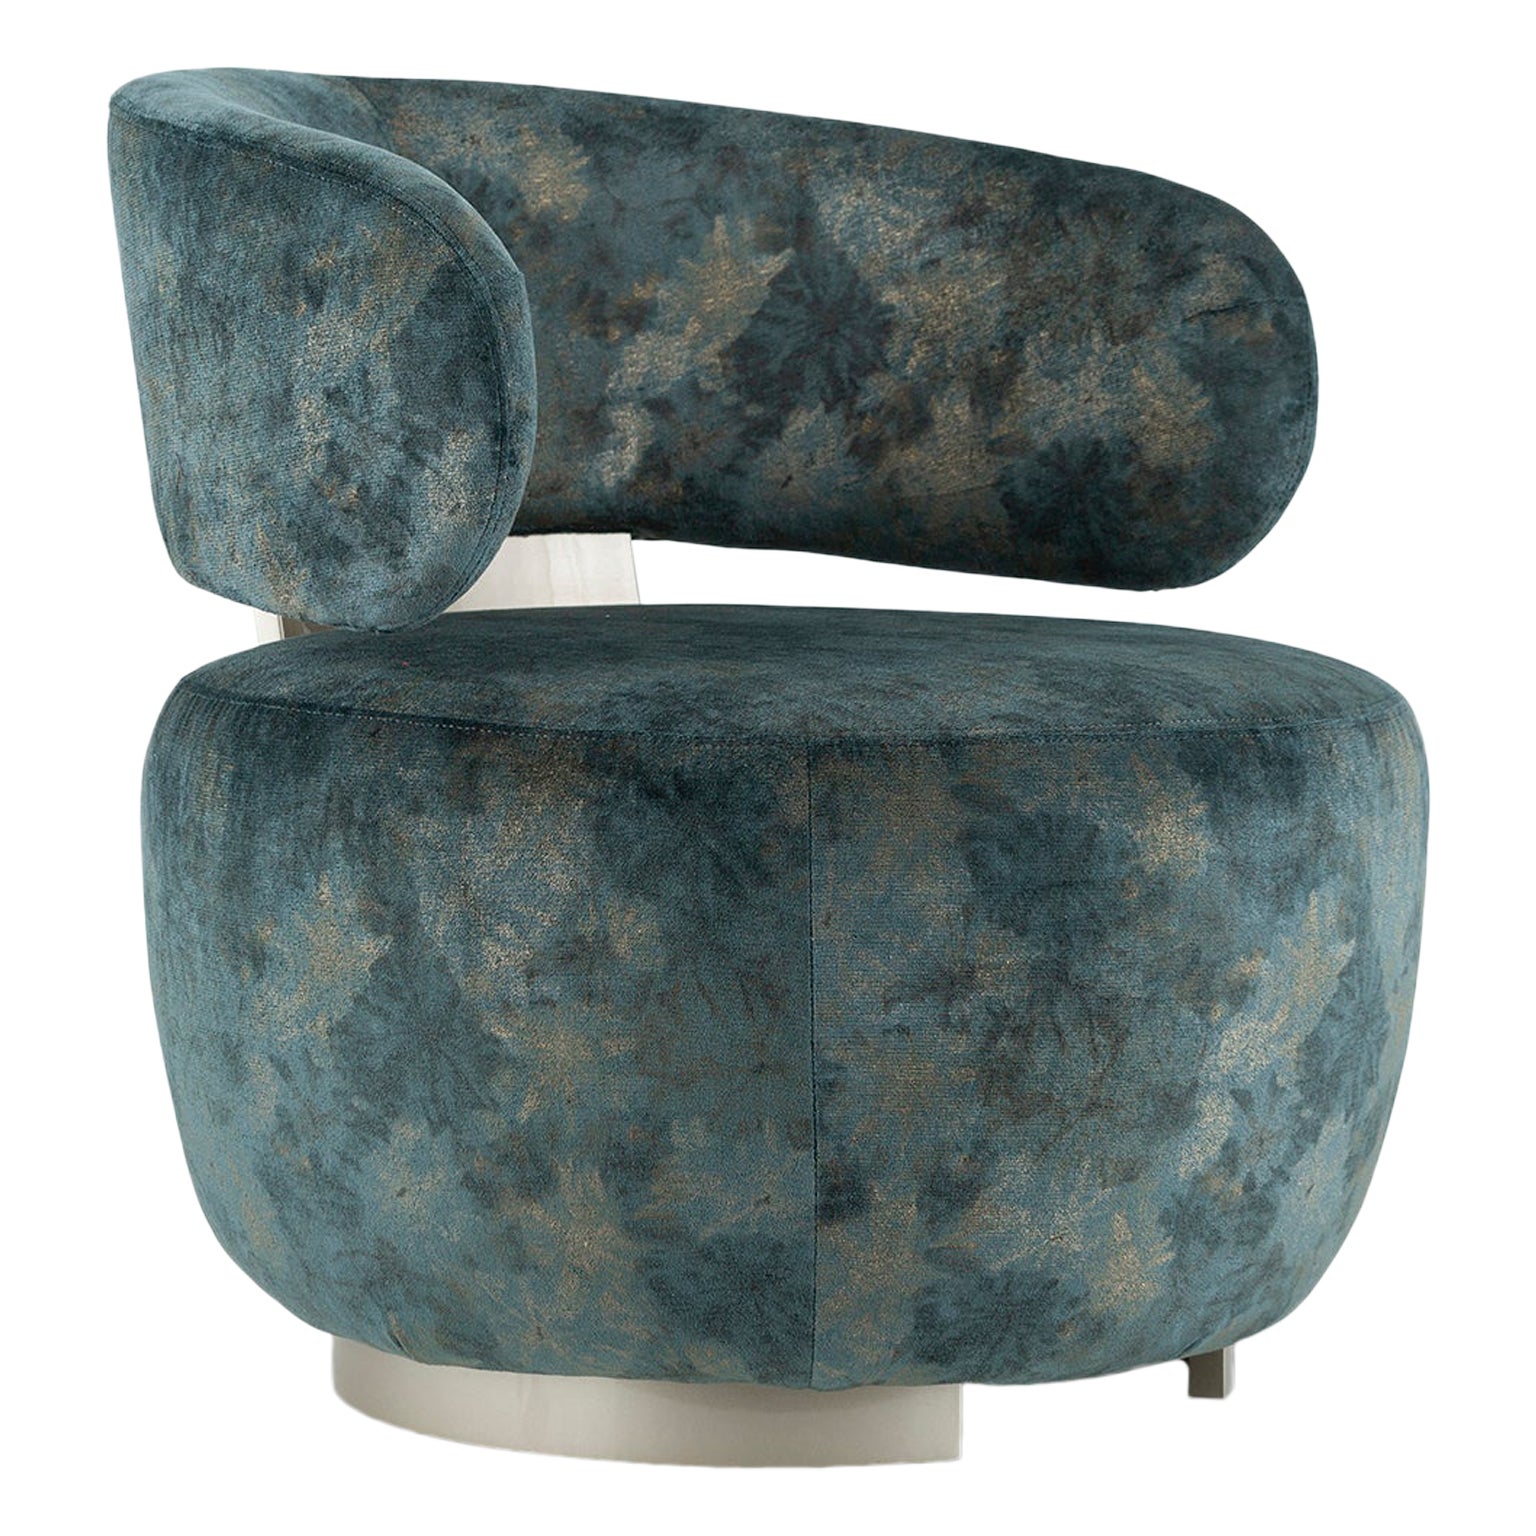 21st Century Modern Caju Armchair Handcrafted in Portugal by Greenapple